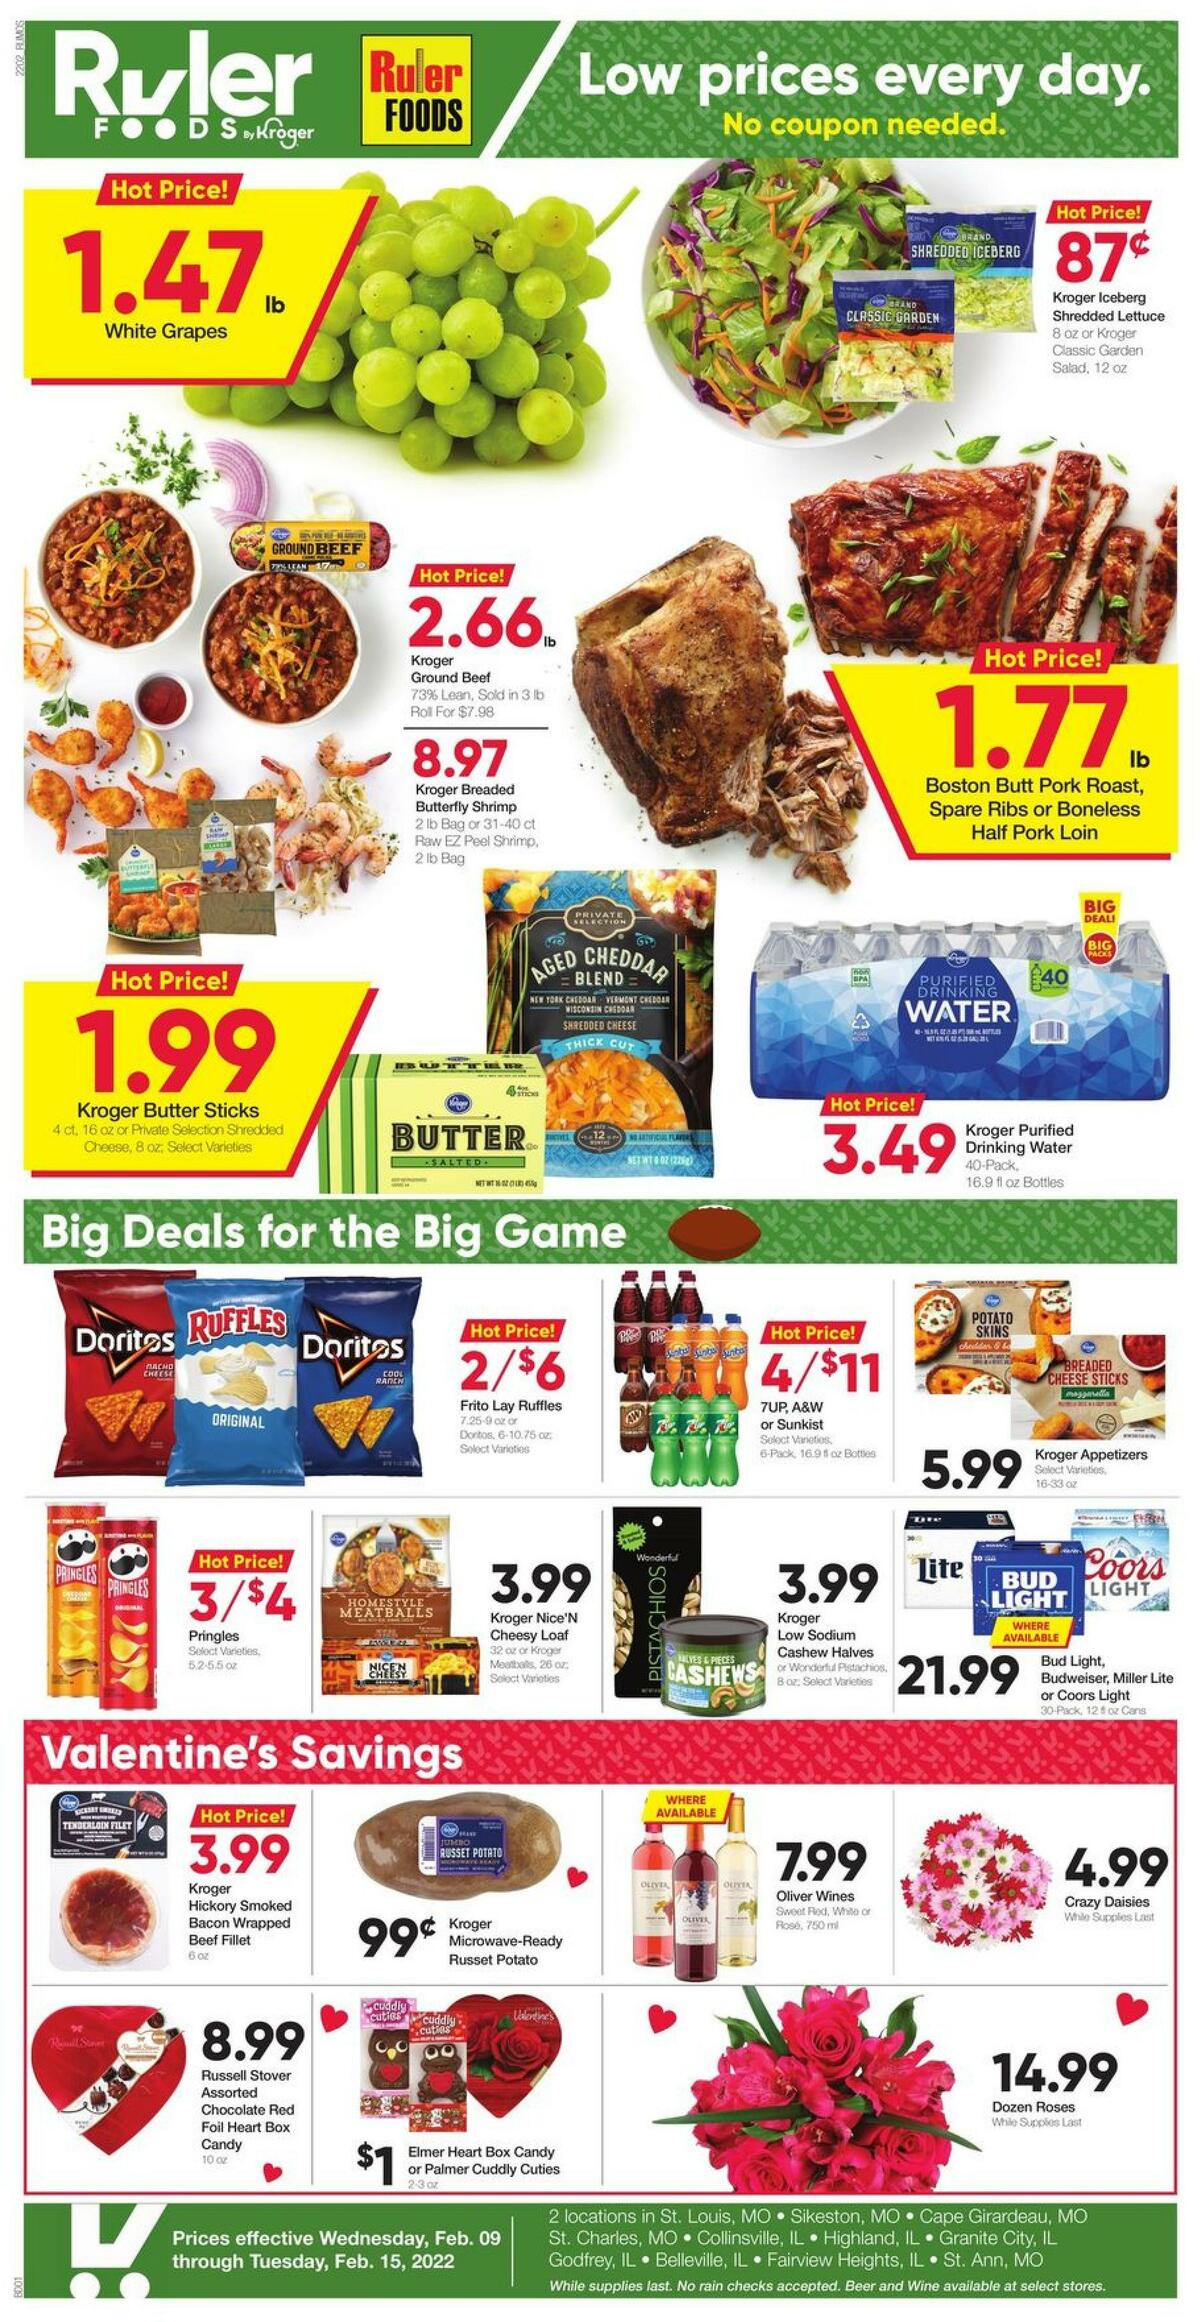 Ruler Foods Weekly Ad from February 9